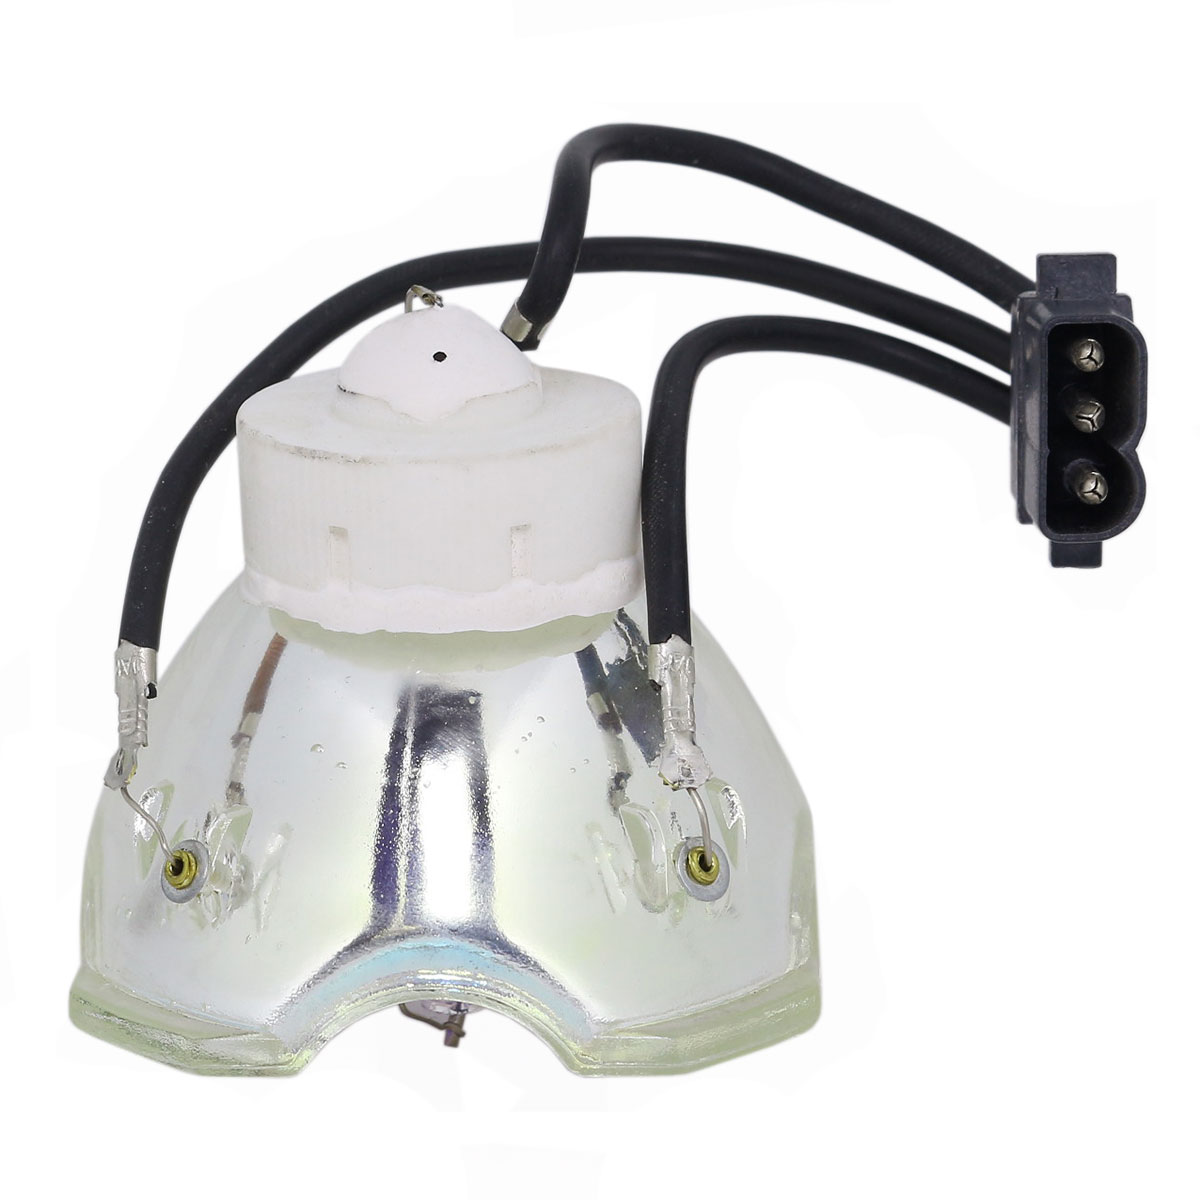 Lutema Economy Bulb for InFocus SP-LAMP-046 Projector (Lamp Only) - image 4 of 6